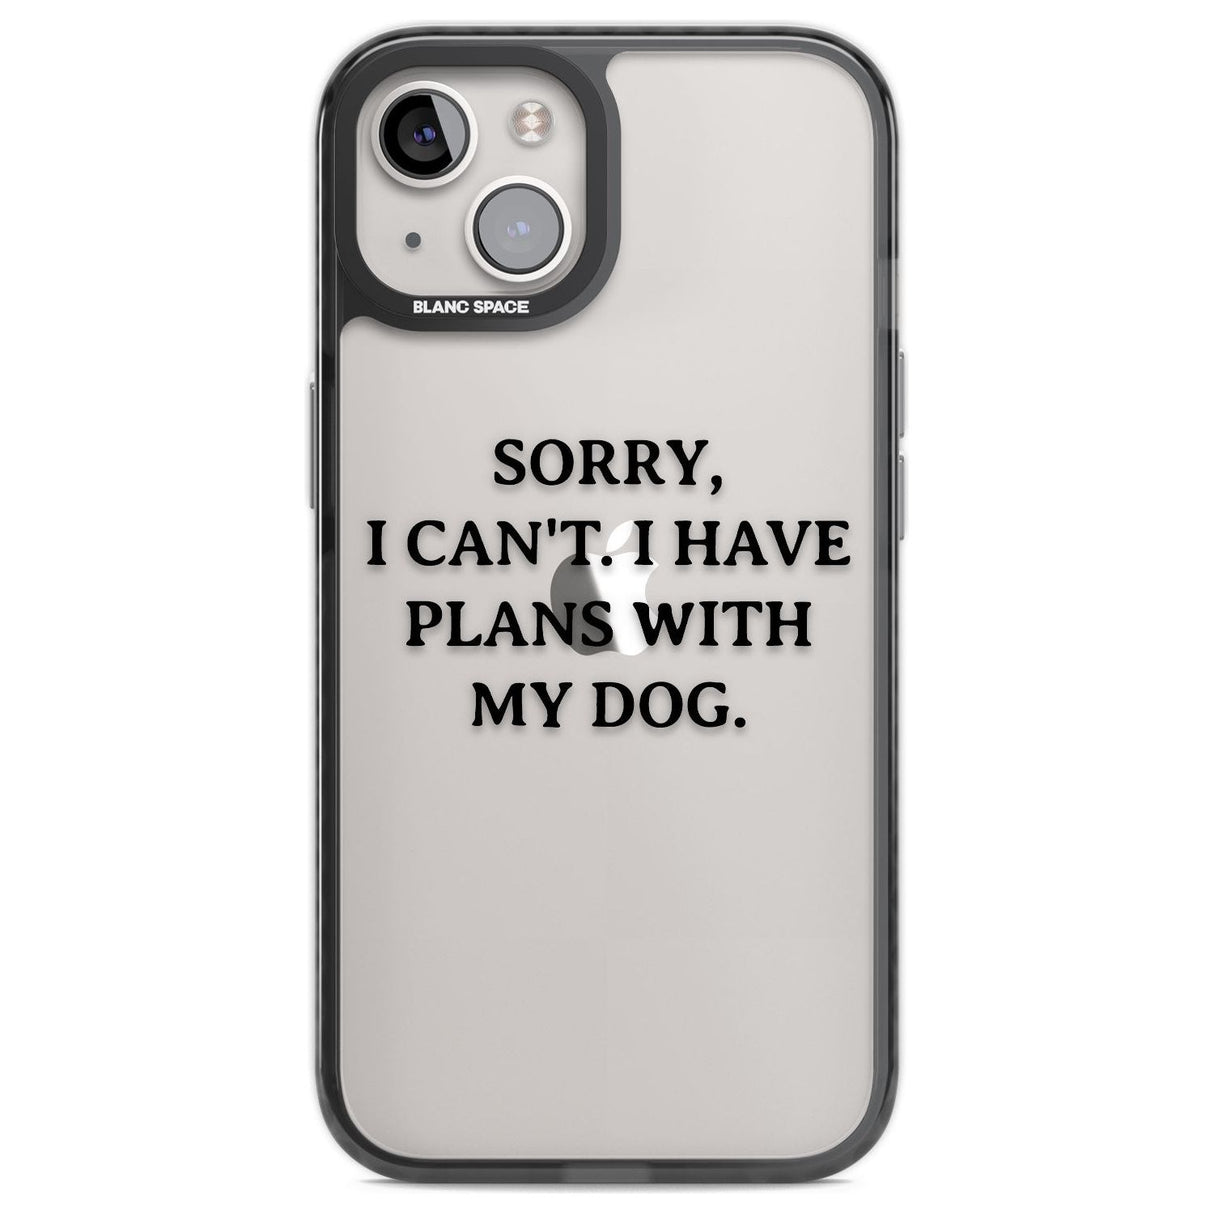 I Have Plans With My Dog Phone Case iPhone 12 / Black Impact Case,iPhone 13 / Black Impact Case,iPhone 12 Pro / Black Impact Case,iPhone 14 / Black Impact Case,iPhone 15 Plus / Black Impact Case,iPhone 15 / Black Impact Case Blanc Space